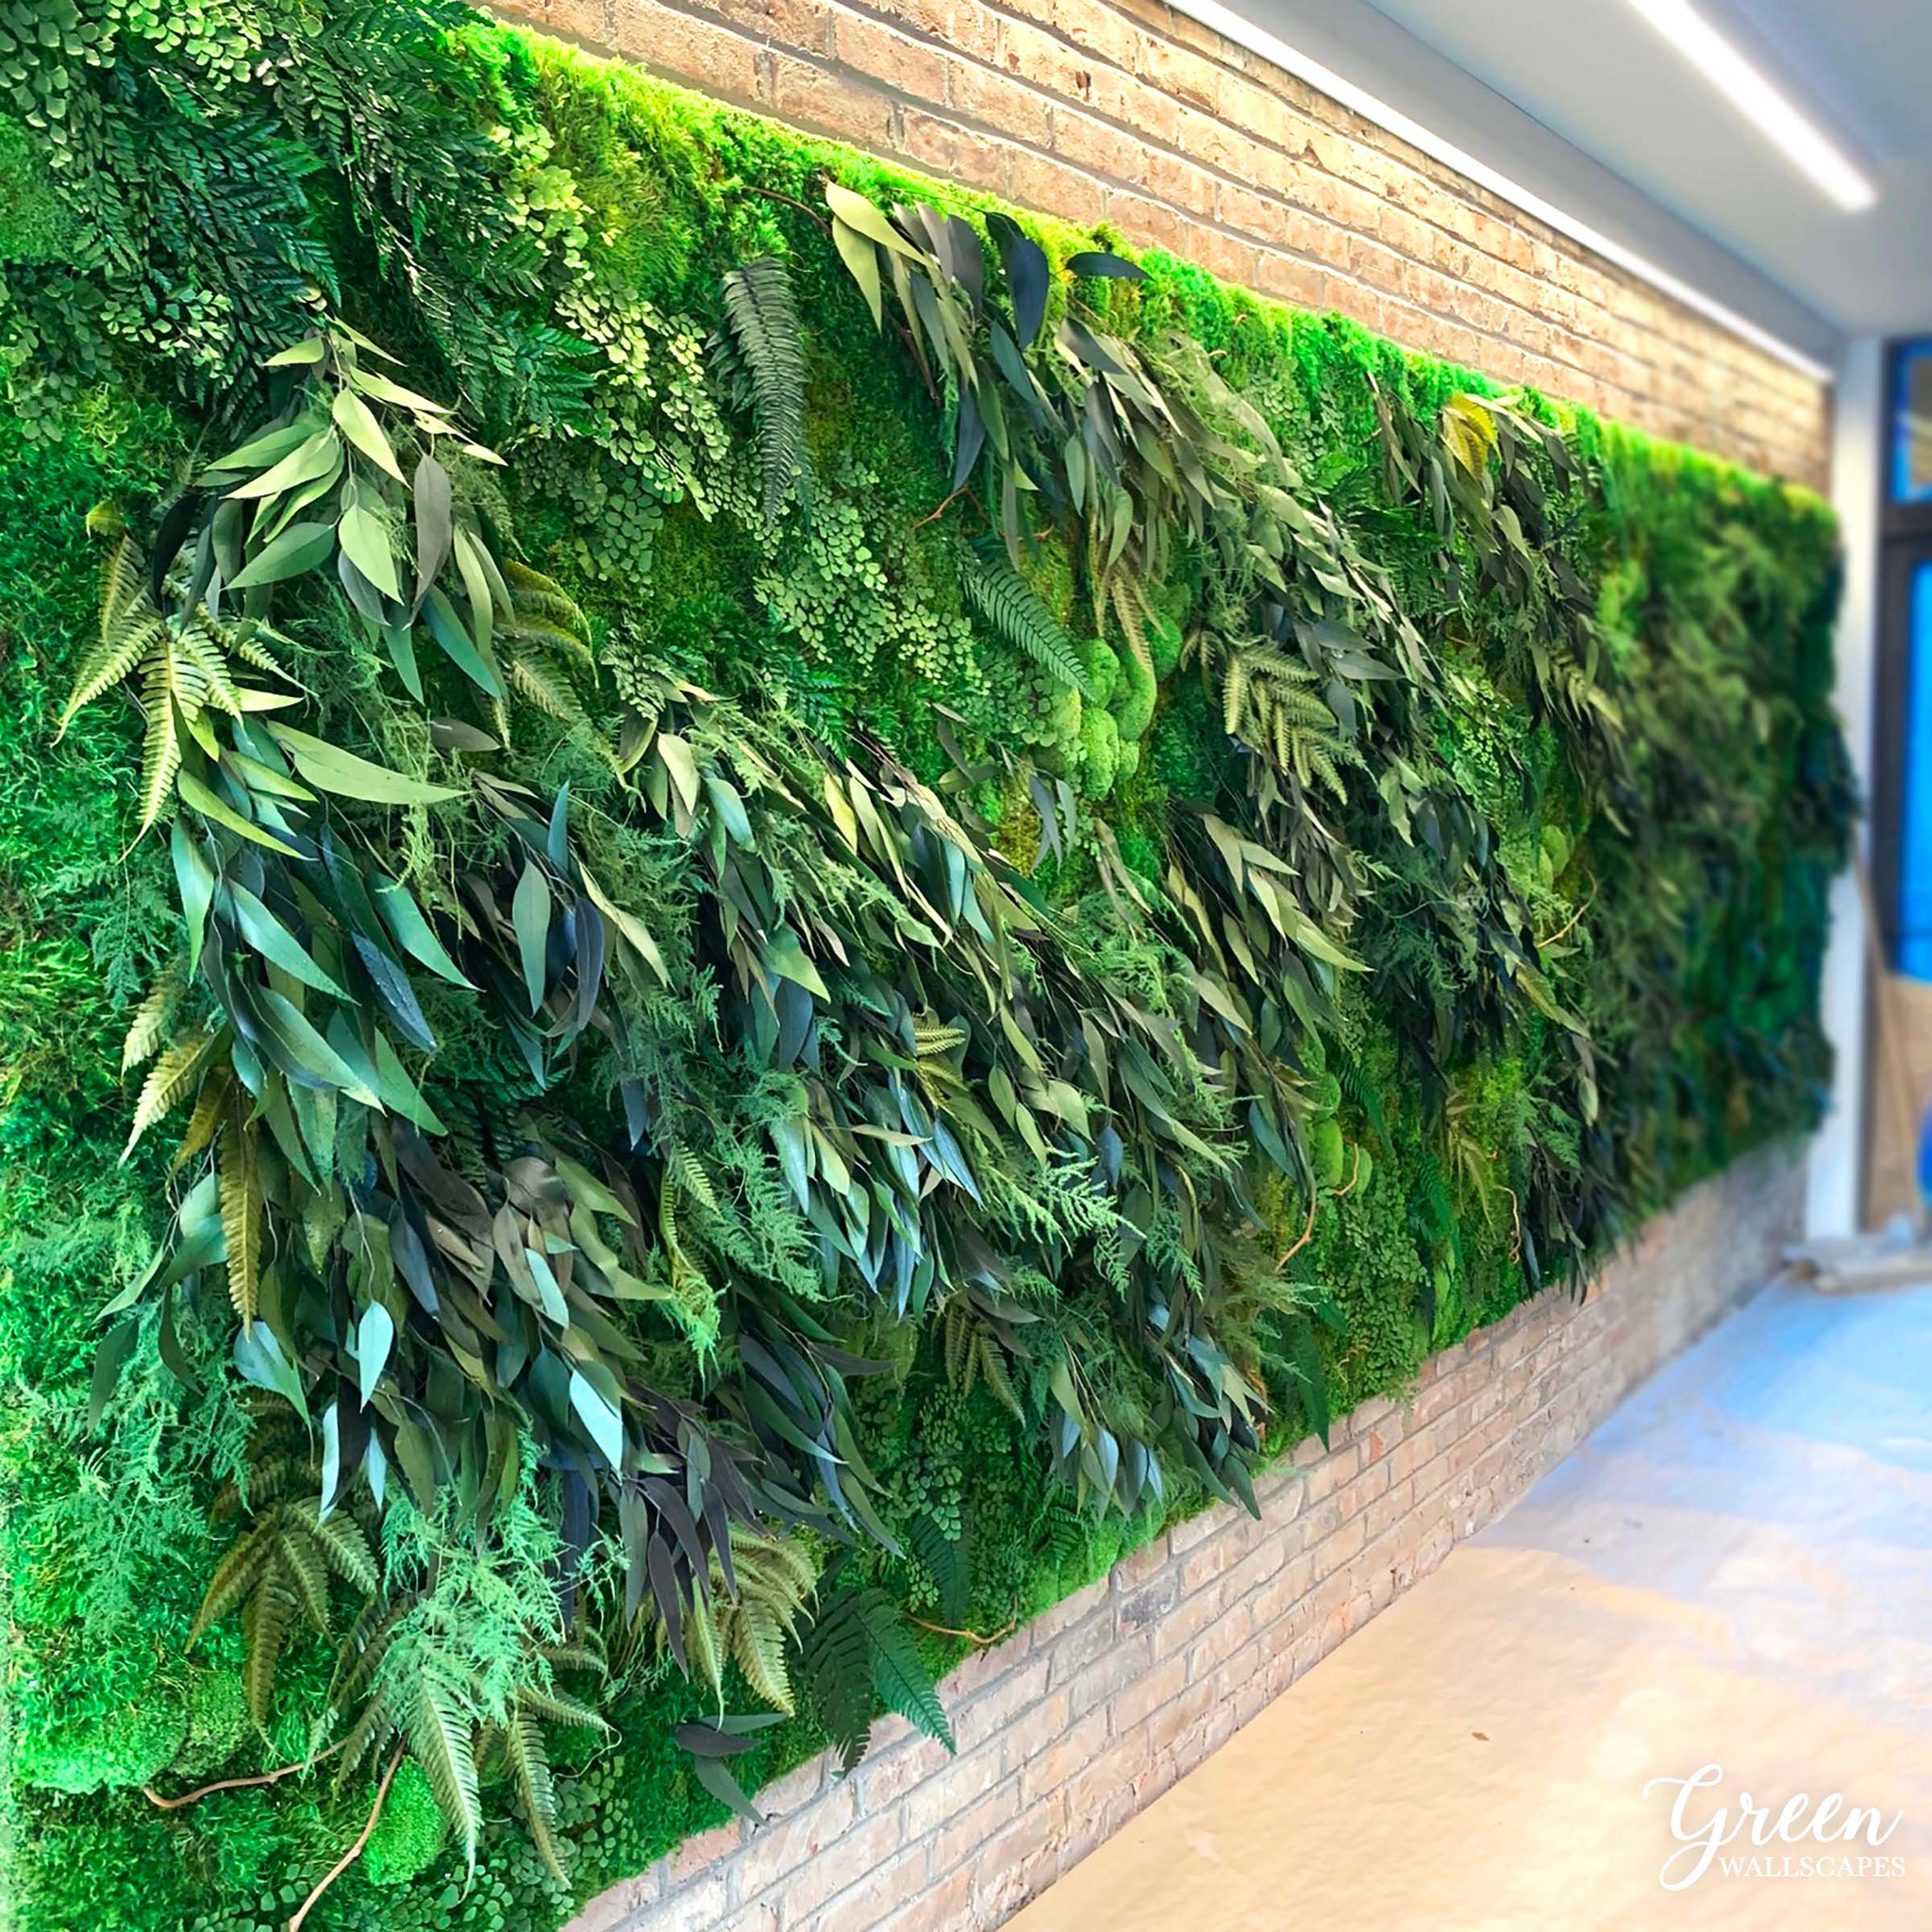 Botanica Fern and Moss Wall  Moss and Fern Wall – Green Wallscapes